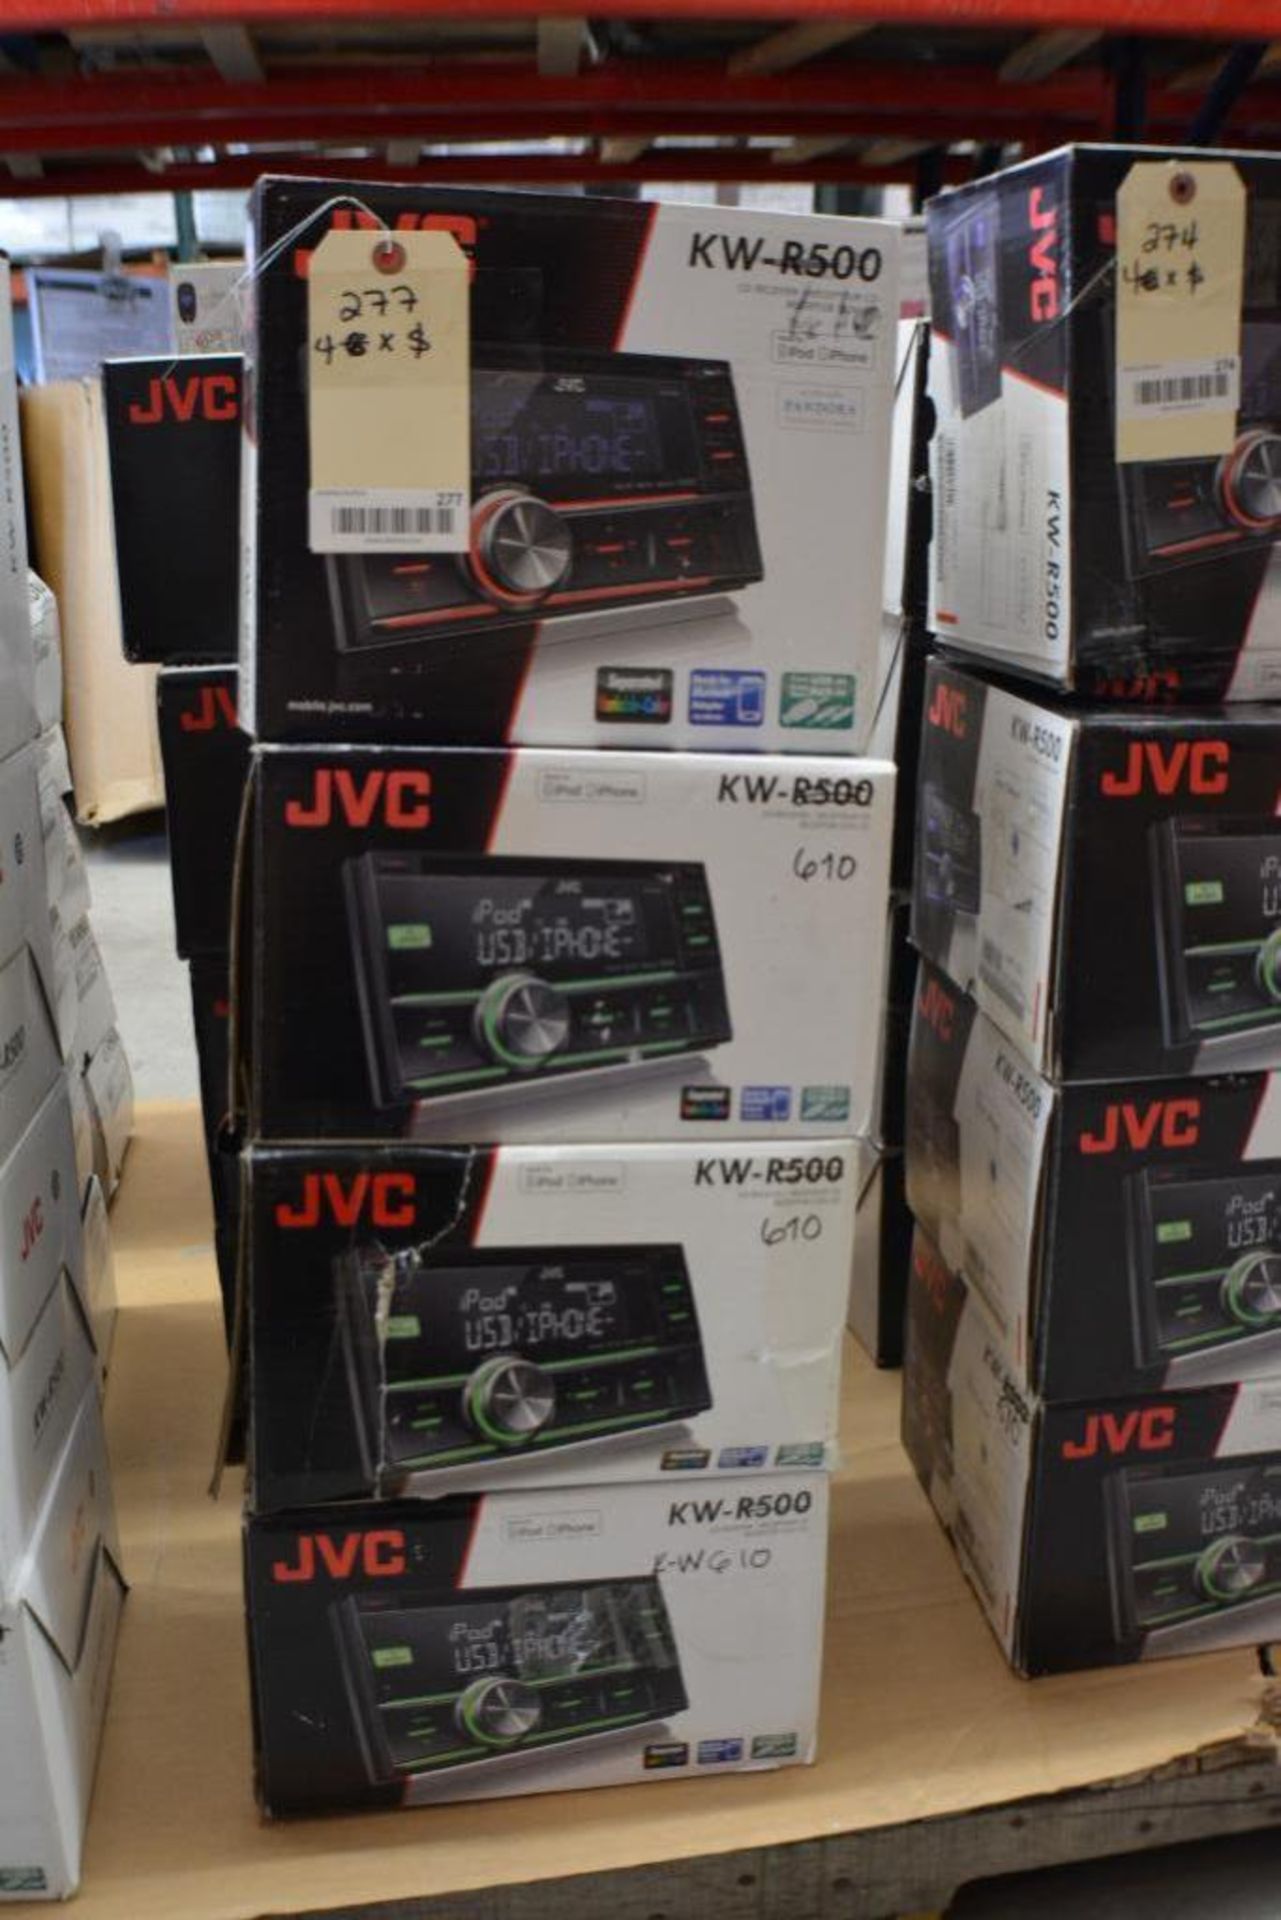 JVC Car Stereo Model KW-XR610 Double-DIN USB/CD Receiver w/ front AUX Input, USB 2.0 for iPod/iPhone